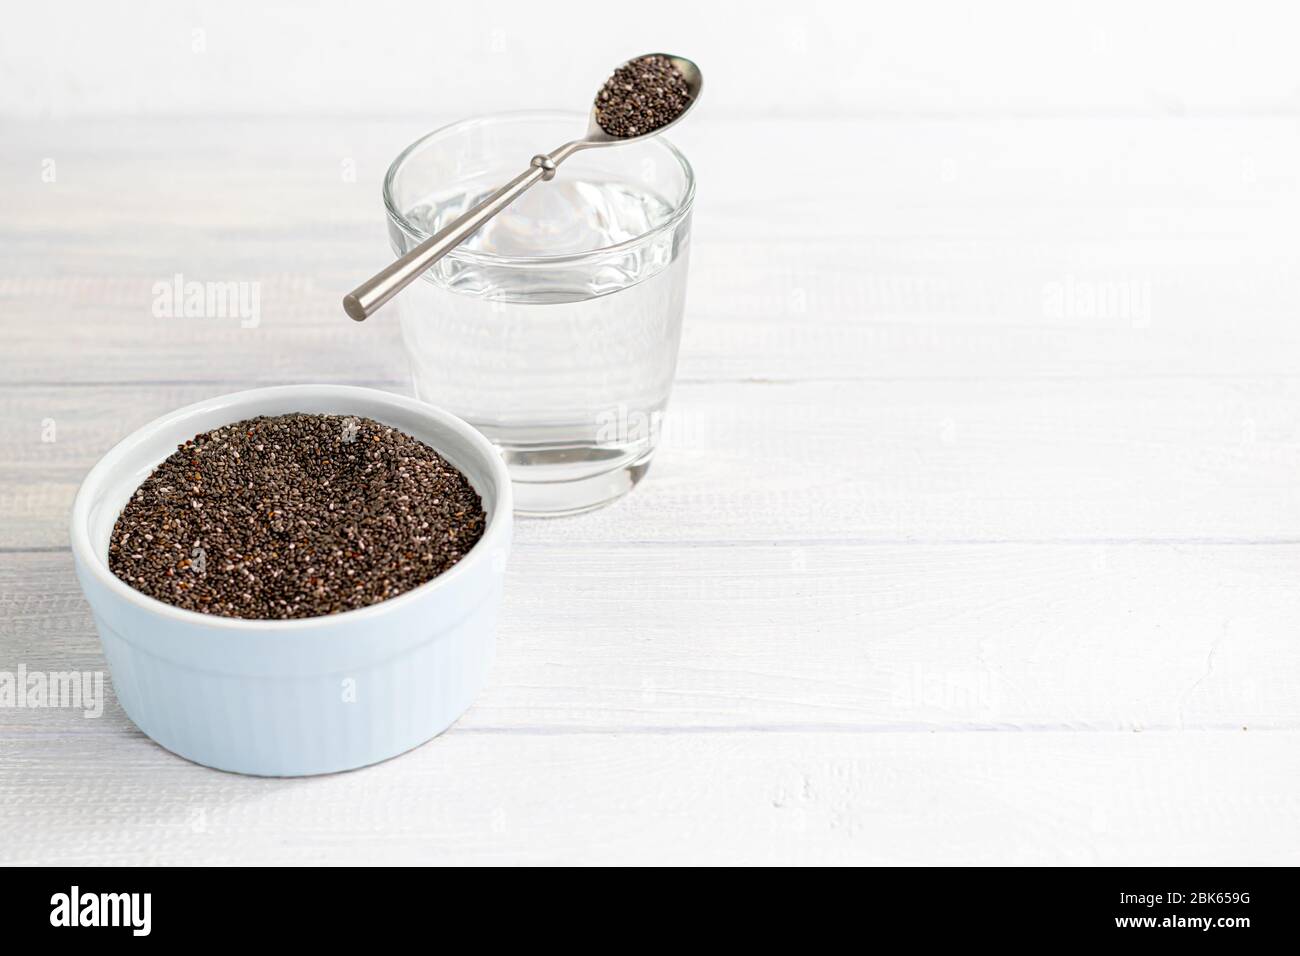 Black Chia Seeds How To Use